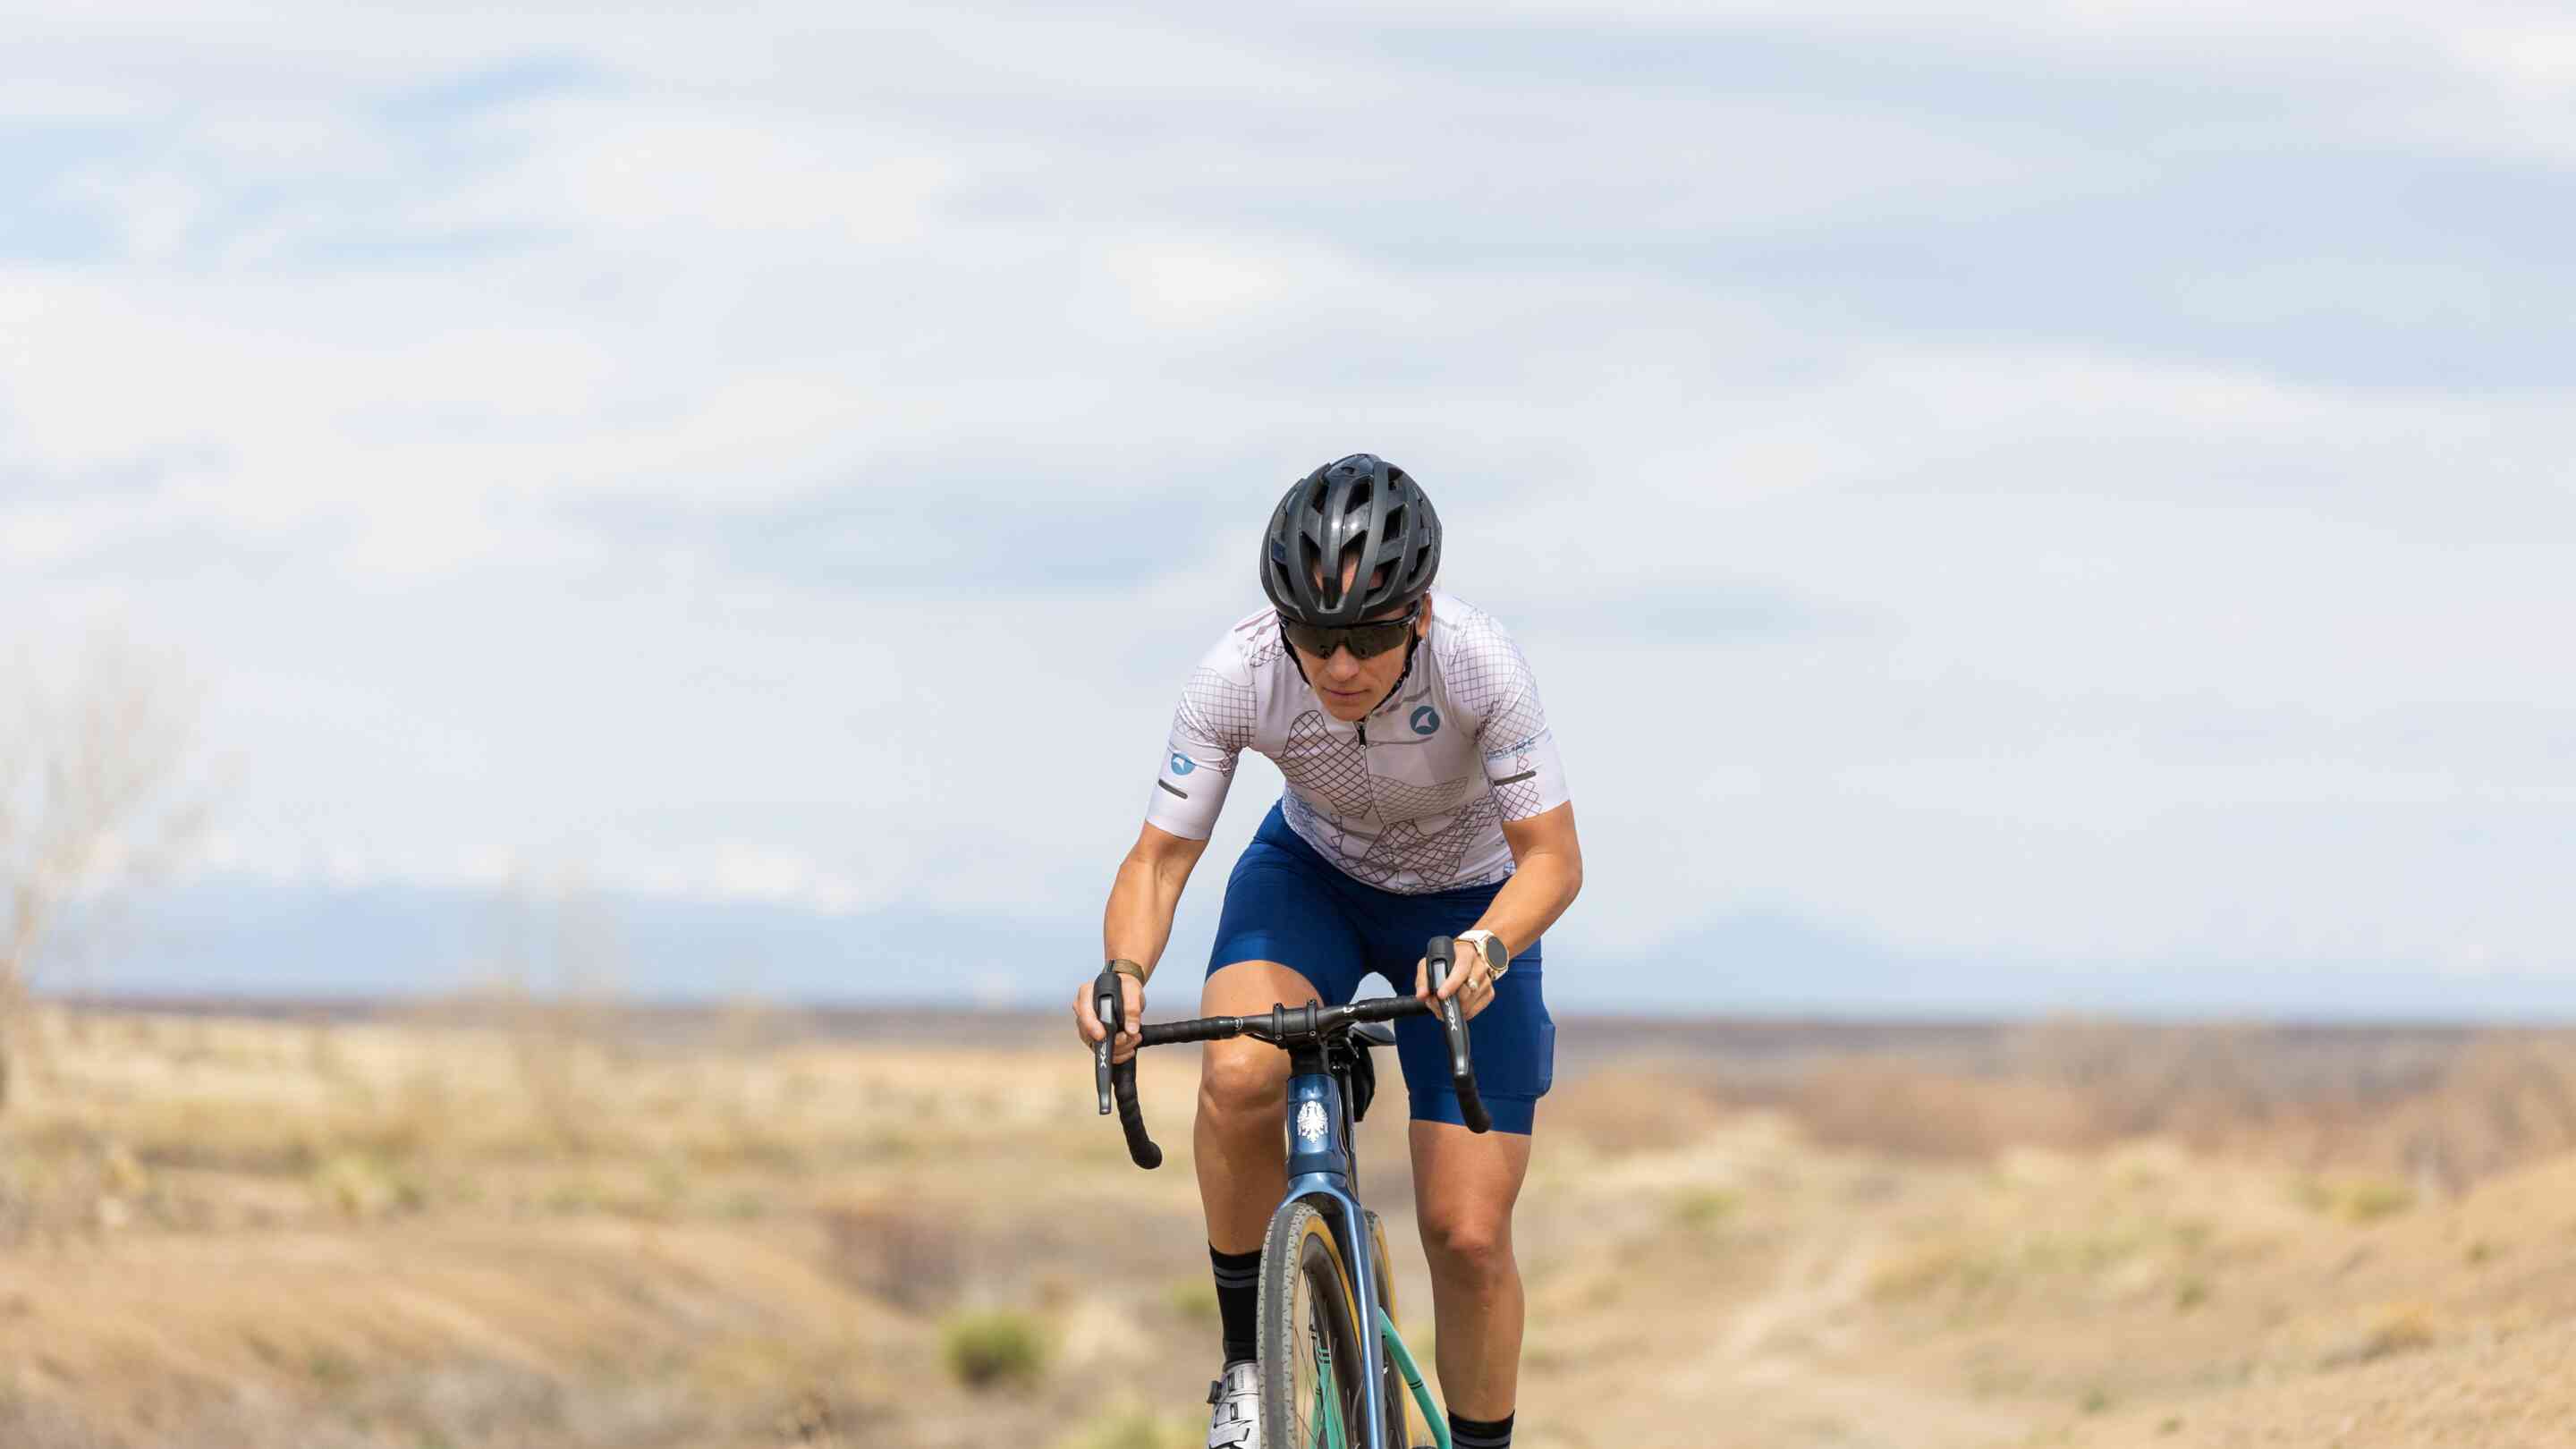 Short Sleeve Cycling Jerseys for Women for all conditions